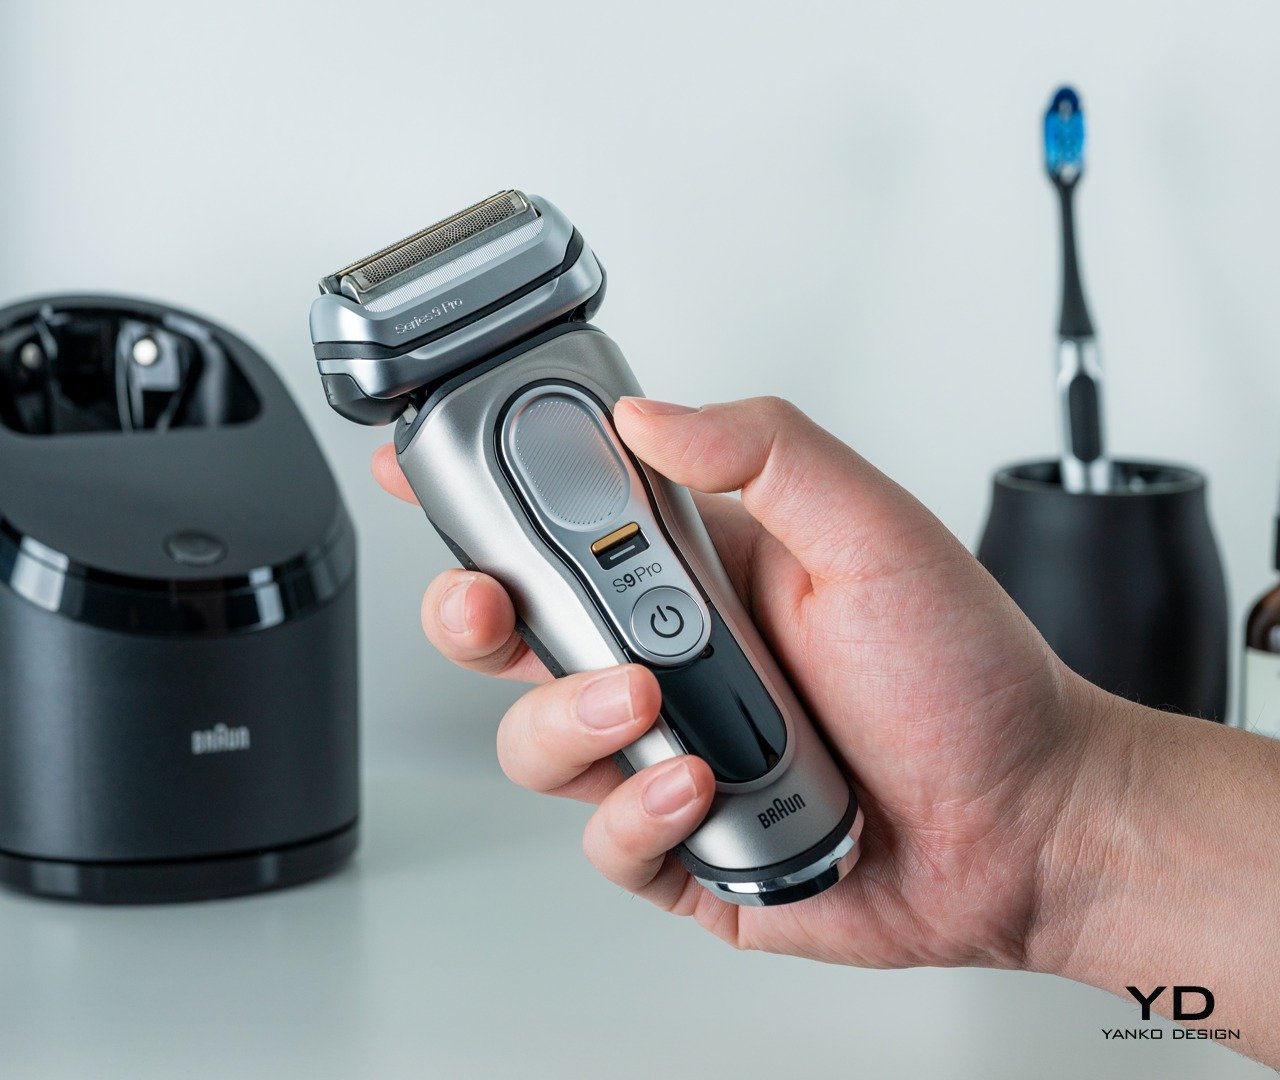 Braun Releases World's Most Efficient Electric Shaver, the Series 9 Pro